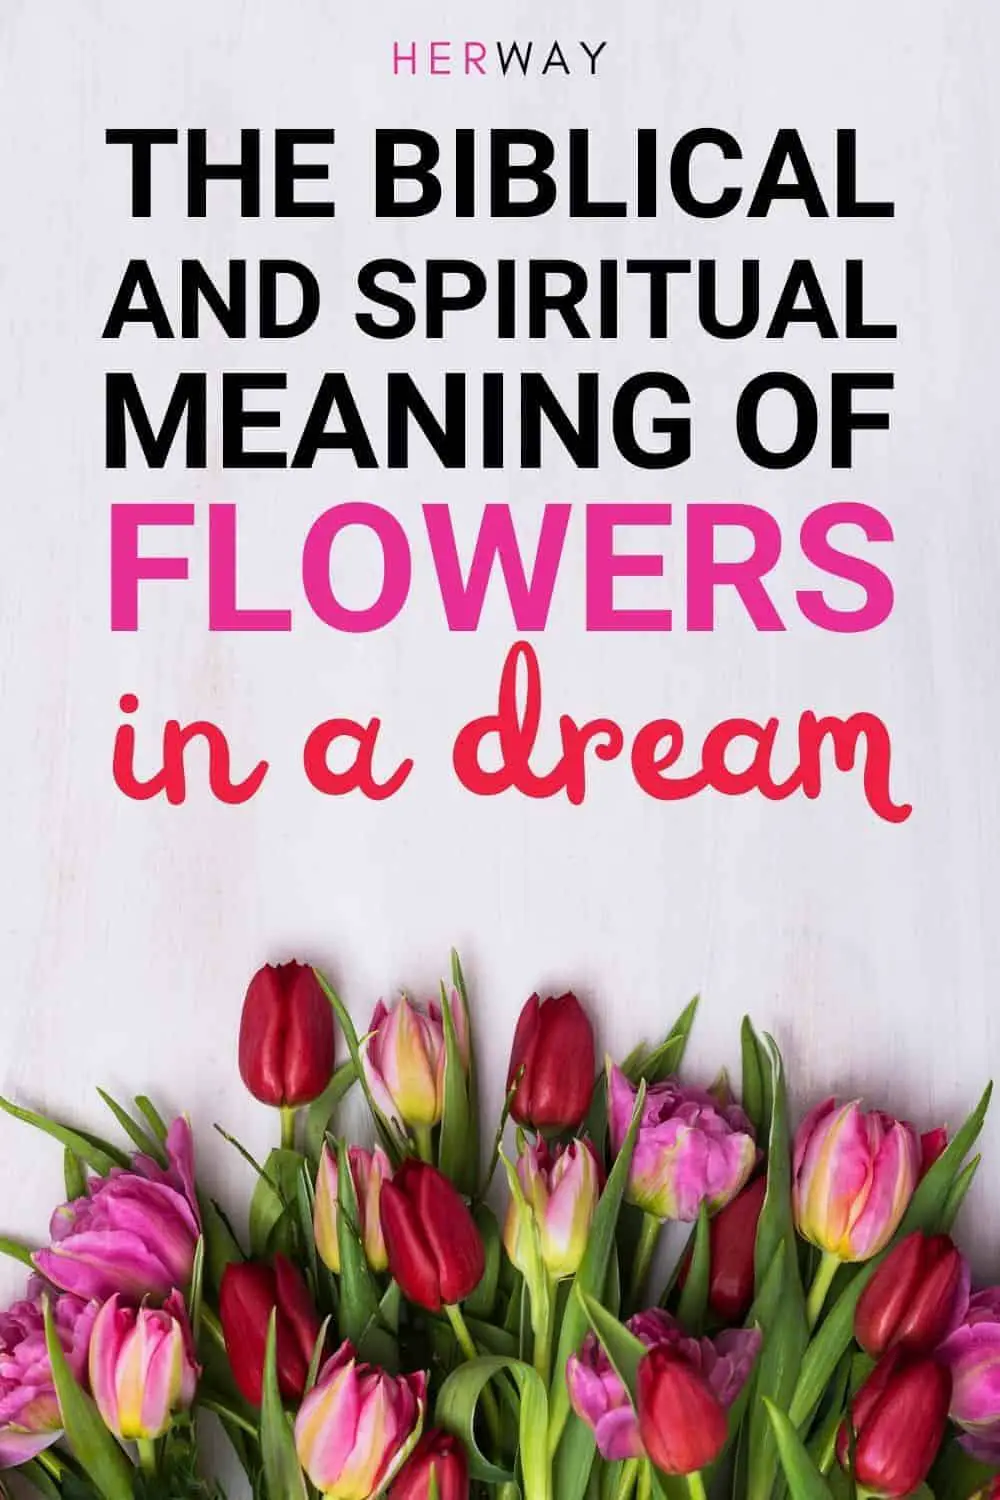 Biblical Meaning Of Flowers In Dreams